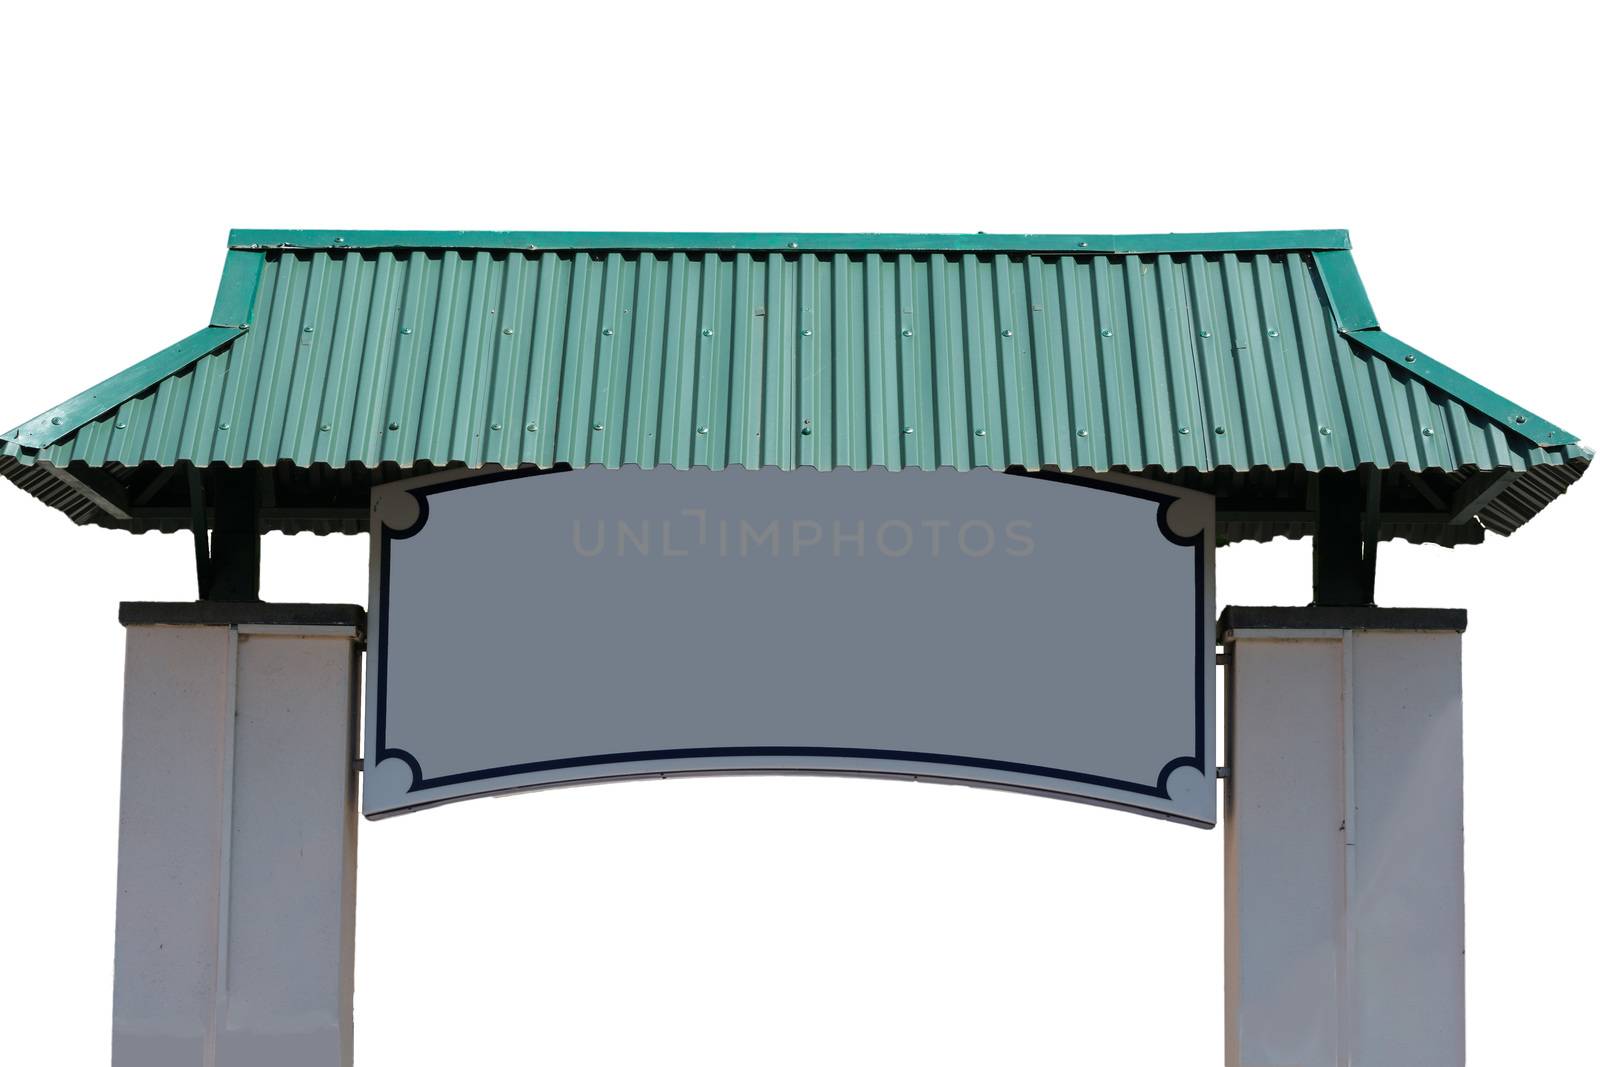 Entrance gate in pagoda style with green canopy exposed against white background